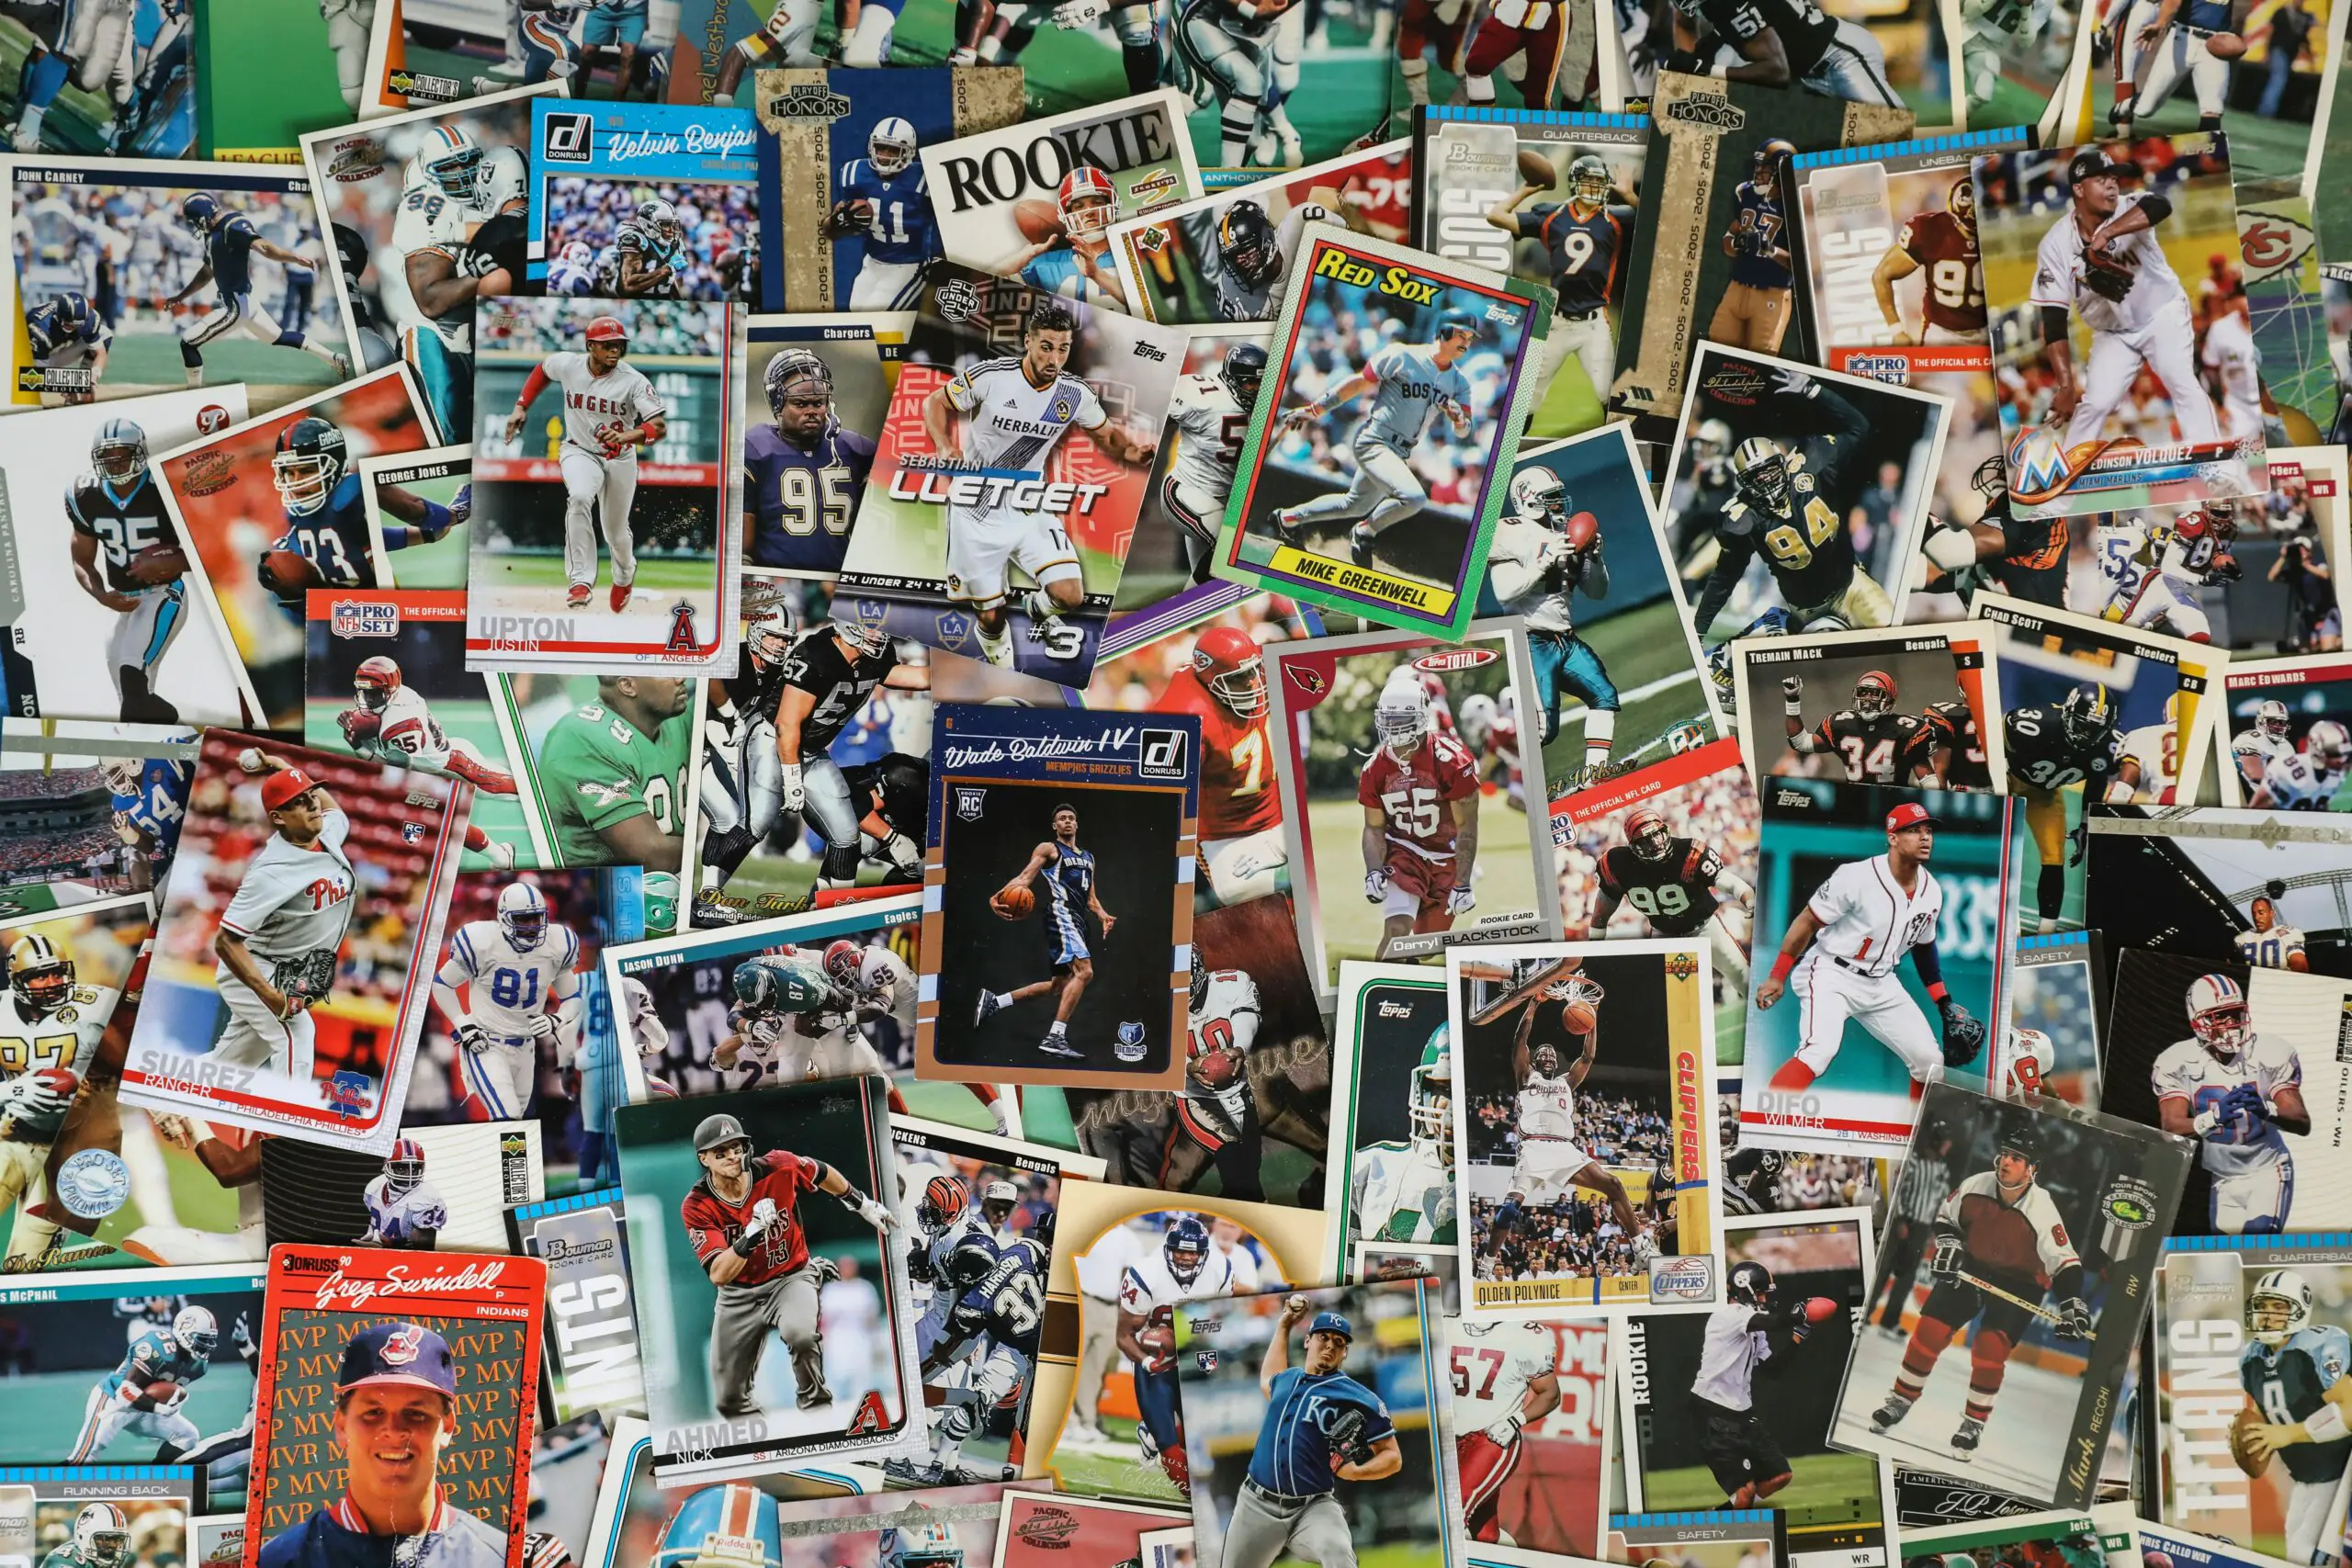 Which Baseball Cards from the 80s are worth money?